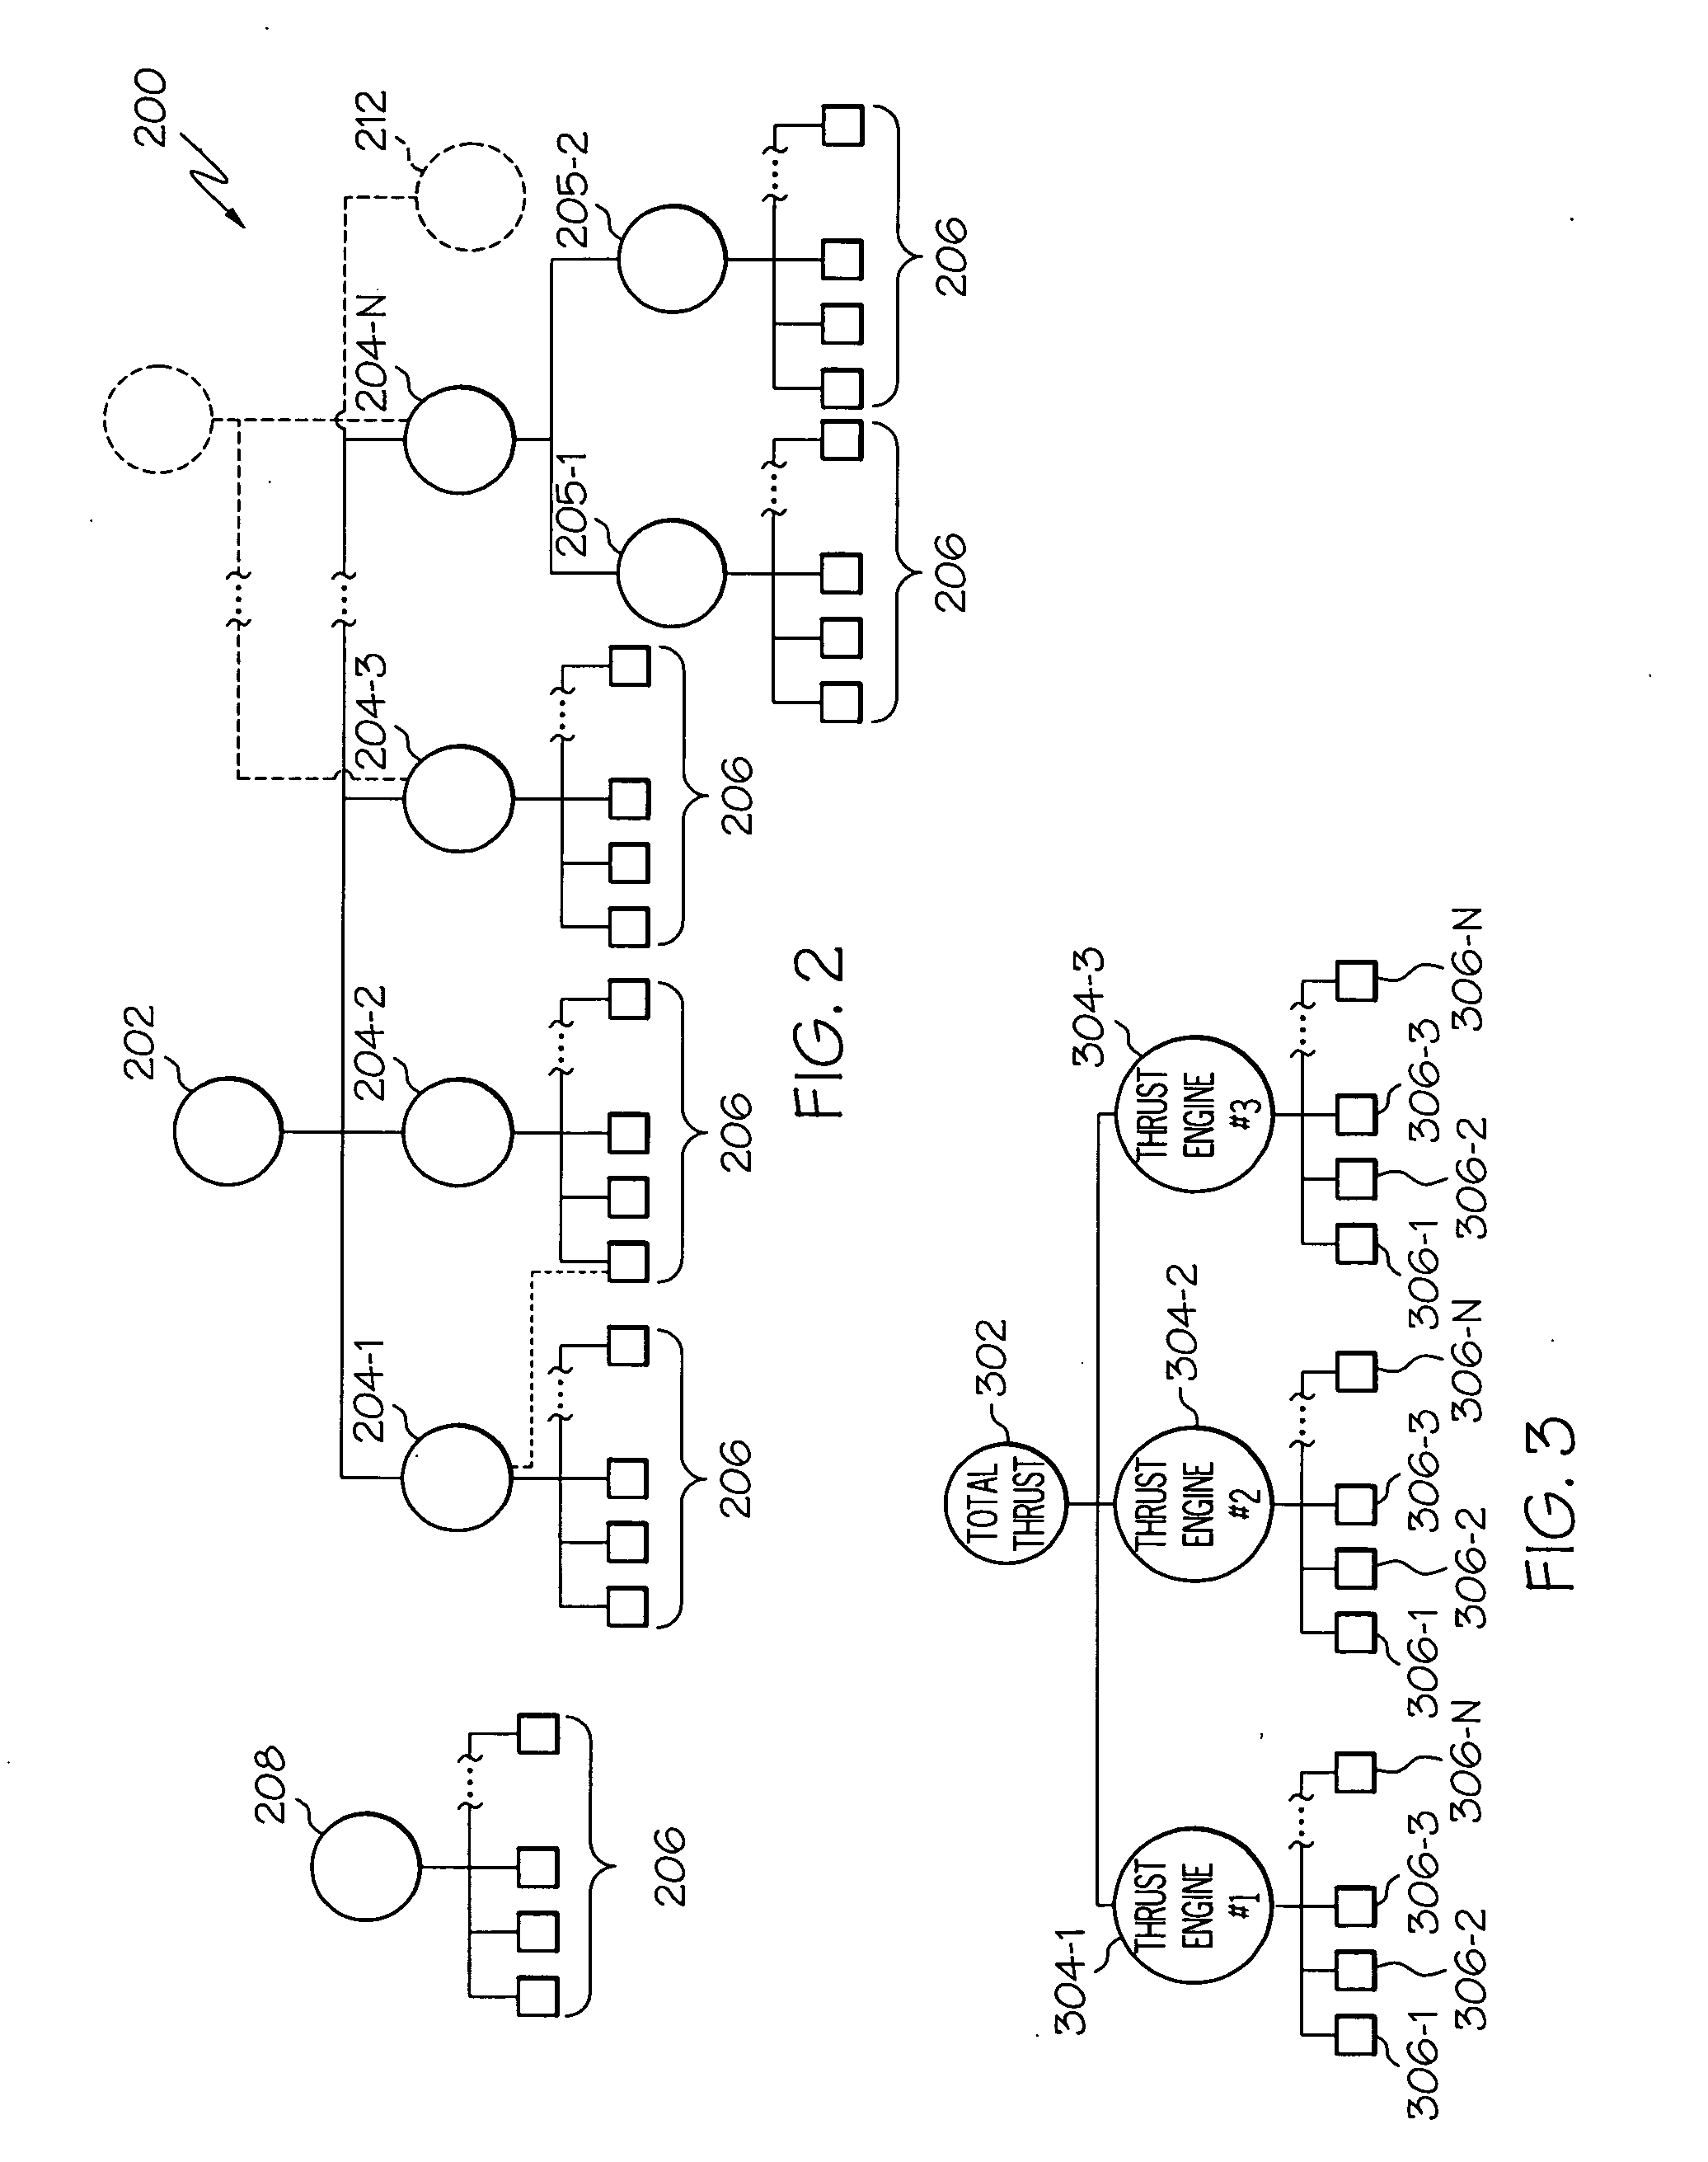 Health capability determination system and method